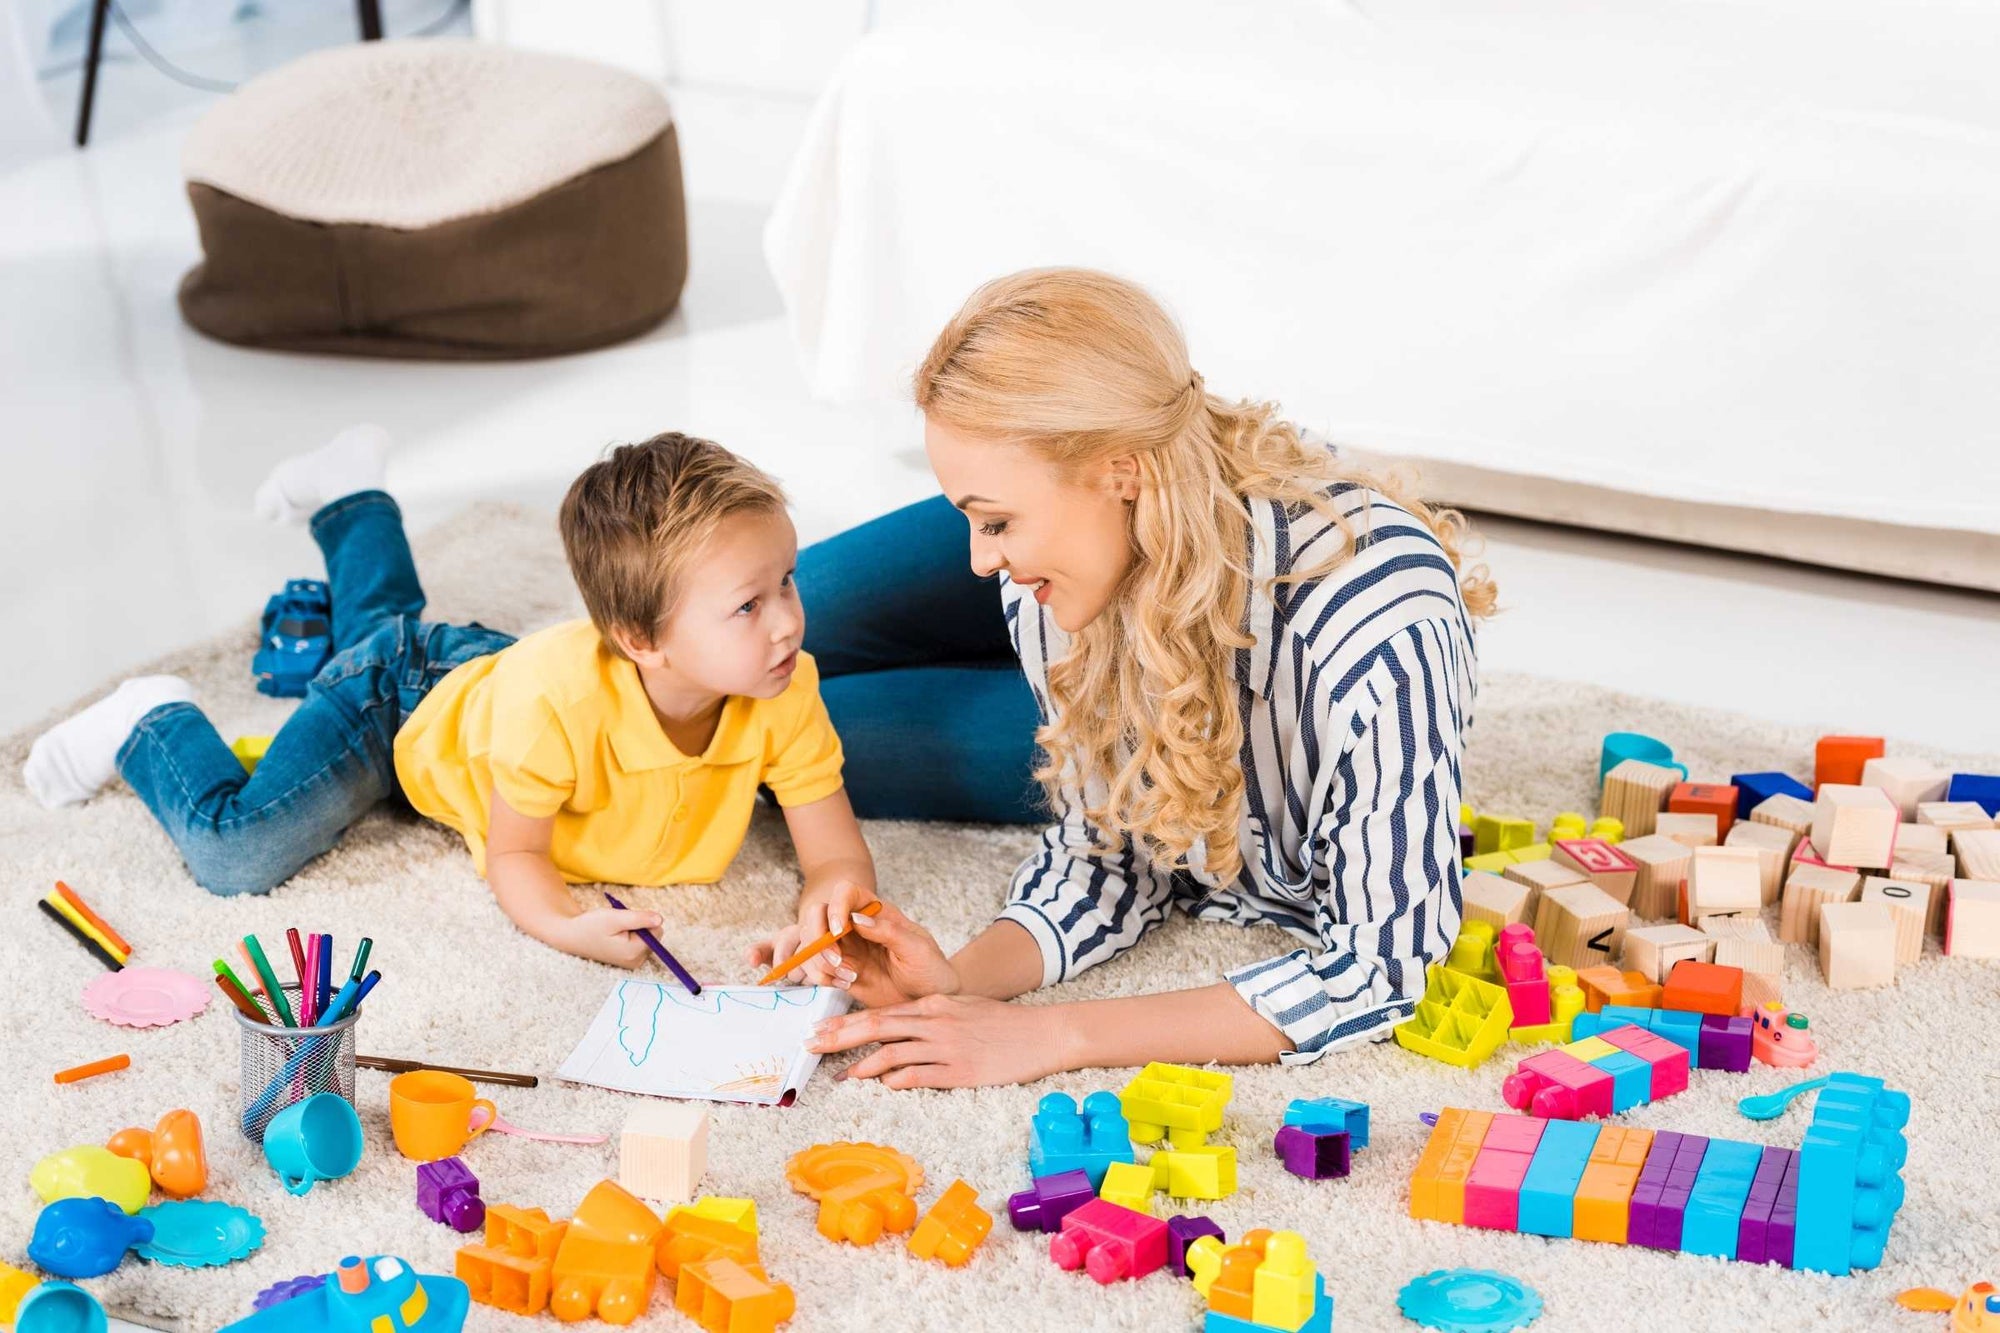 A mother sparks her child's curiosity with educational toys including building blocks and colouring mats